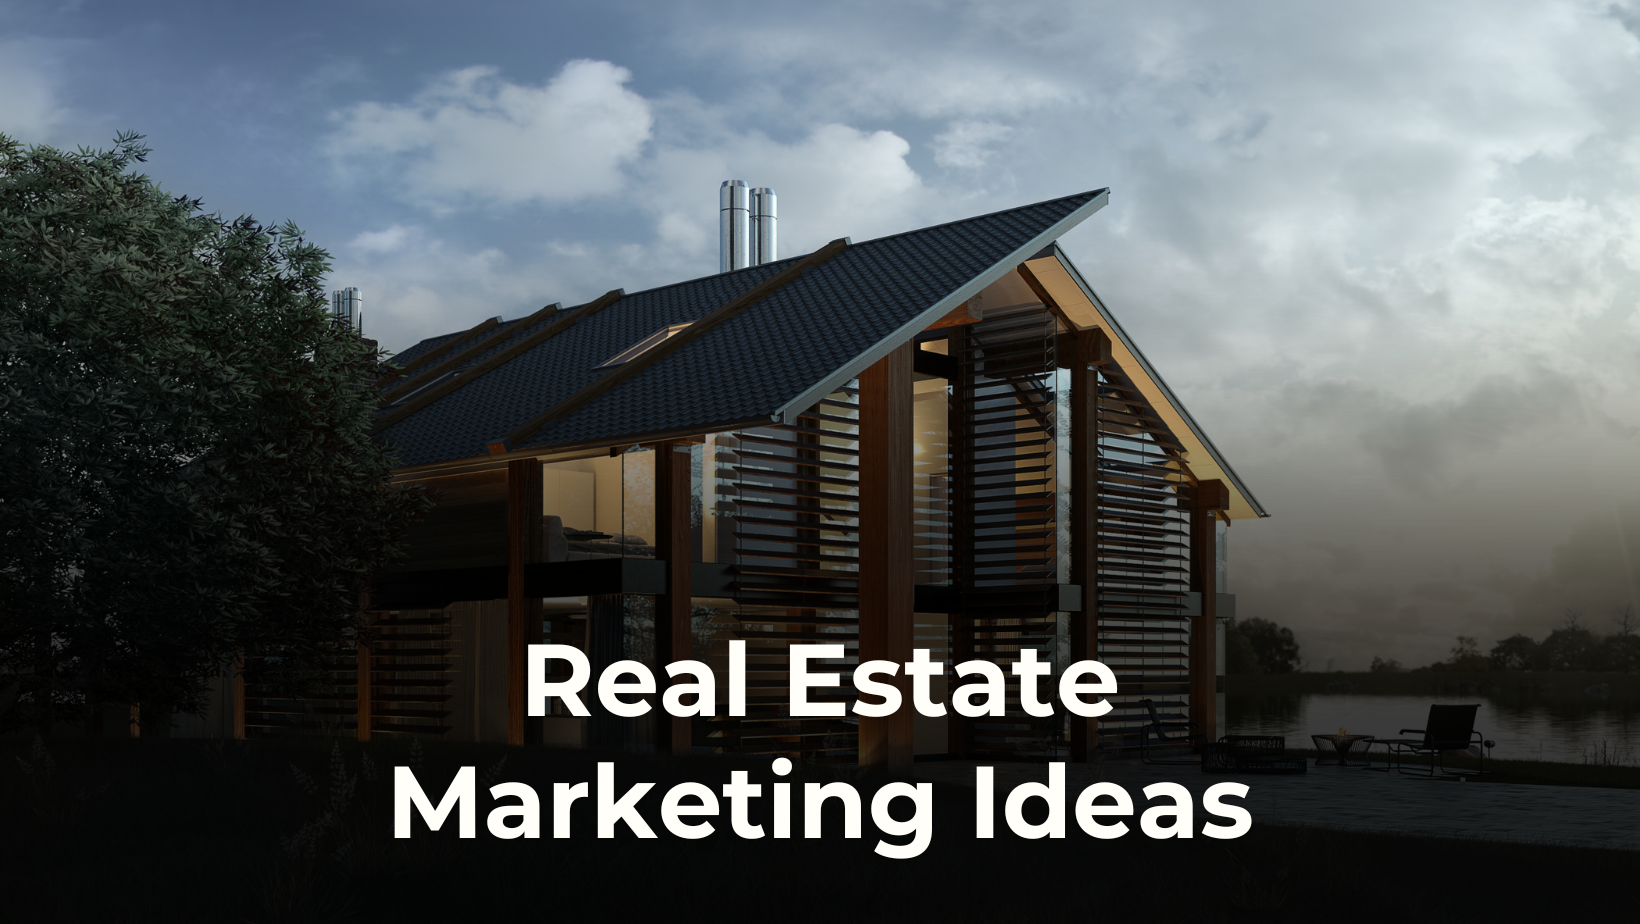 11 Easy Real Estate Marketing Ideas to Bring in Qualified Buyers